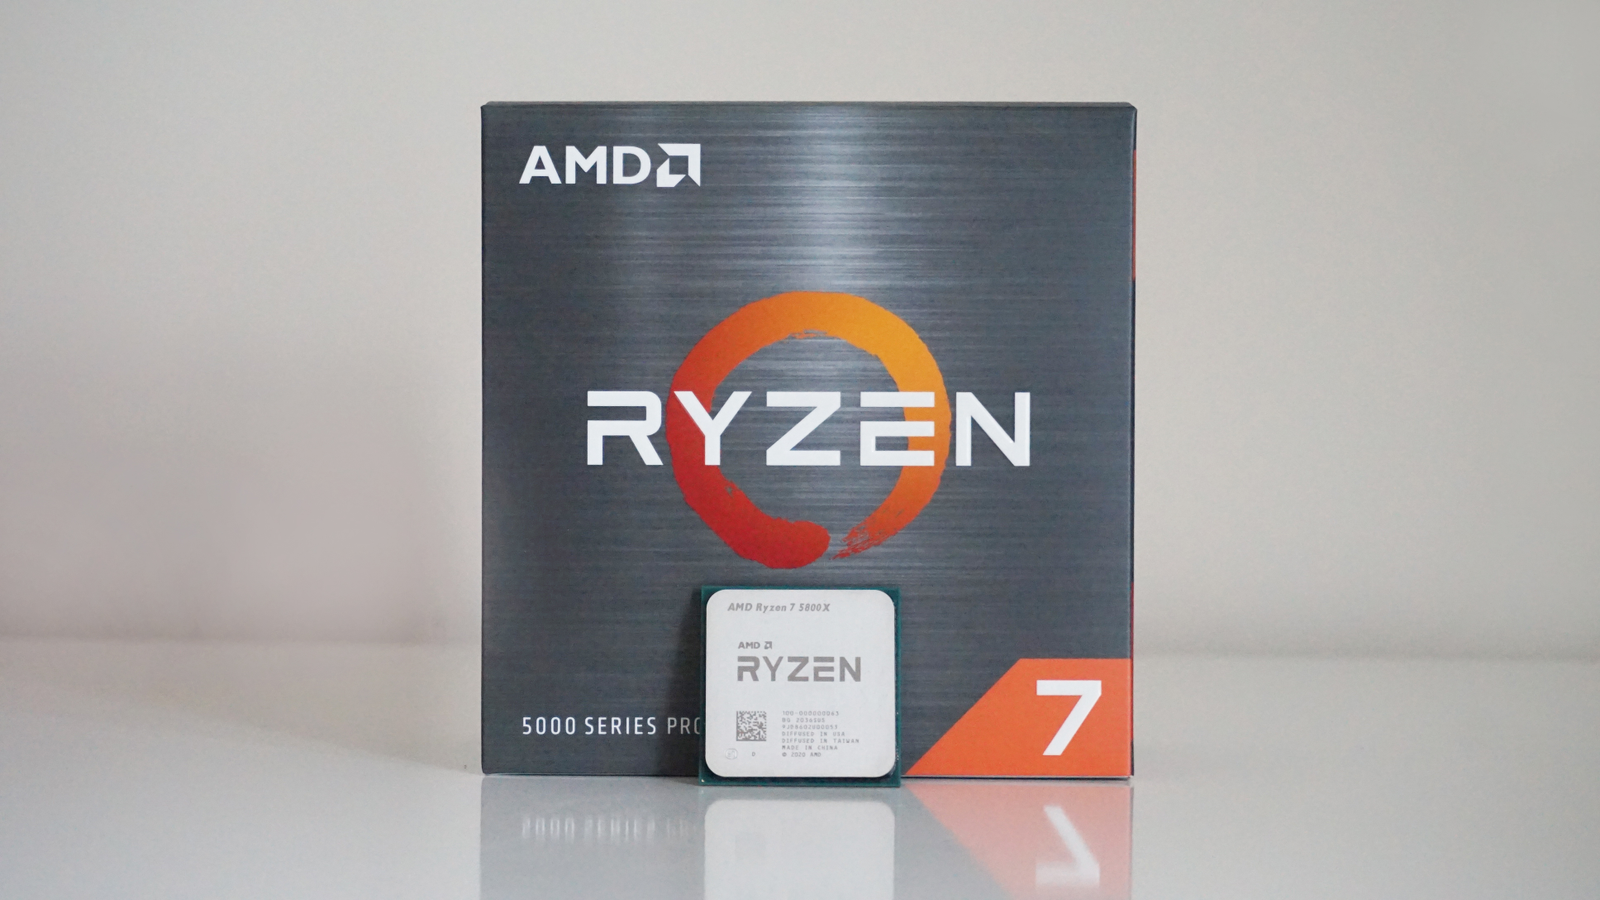 The AMD Ryzen 7 5800X3D remains one of the fastest gaming CPUs - and now  it's down to £281